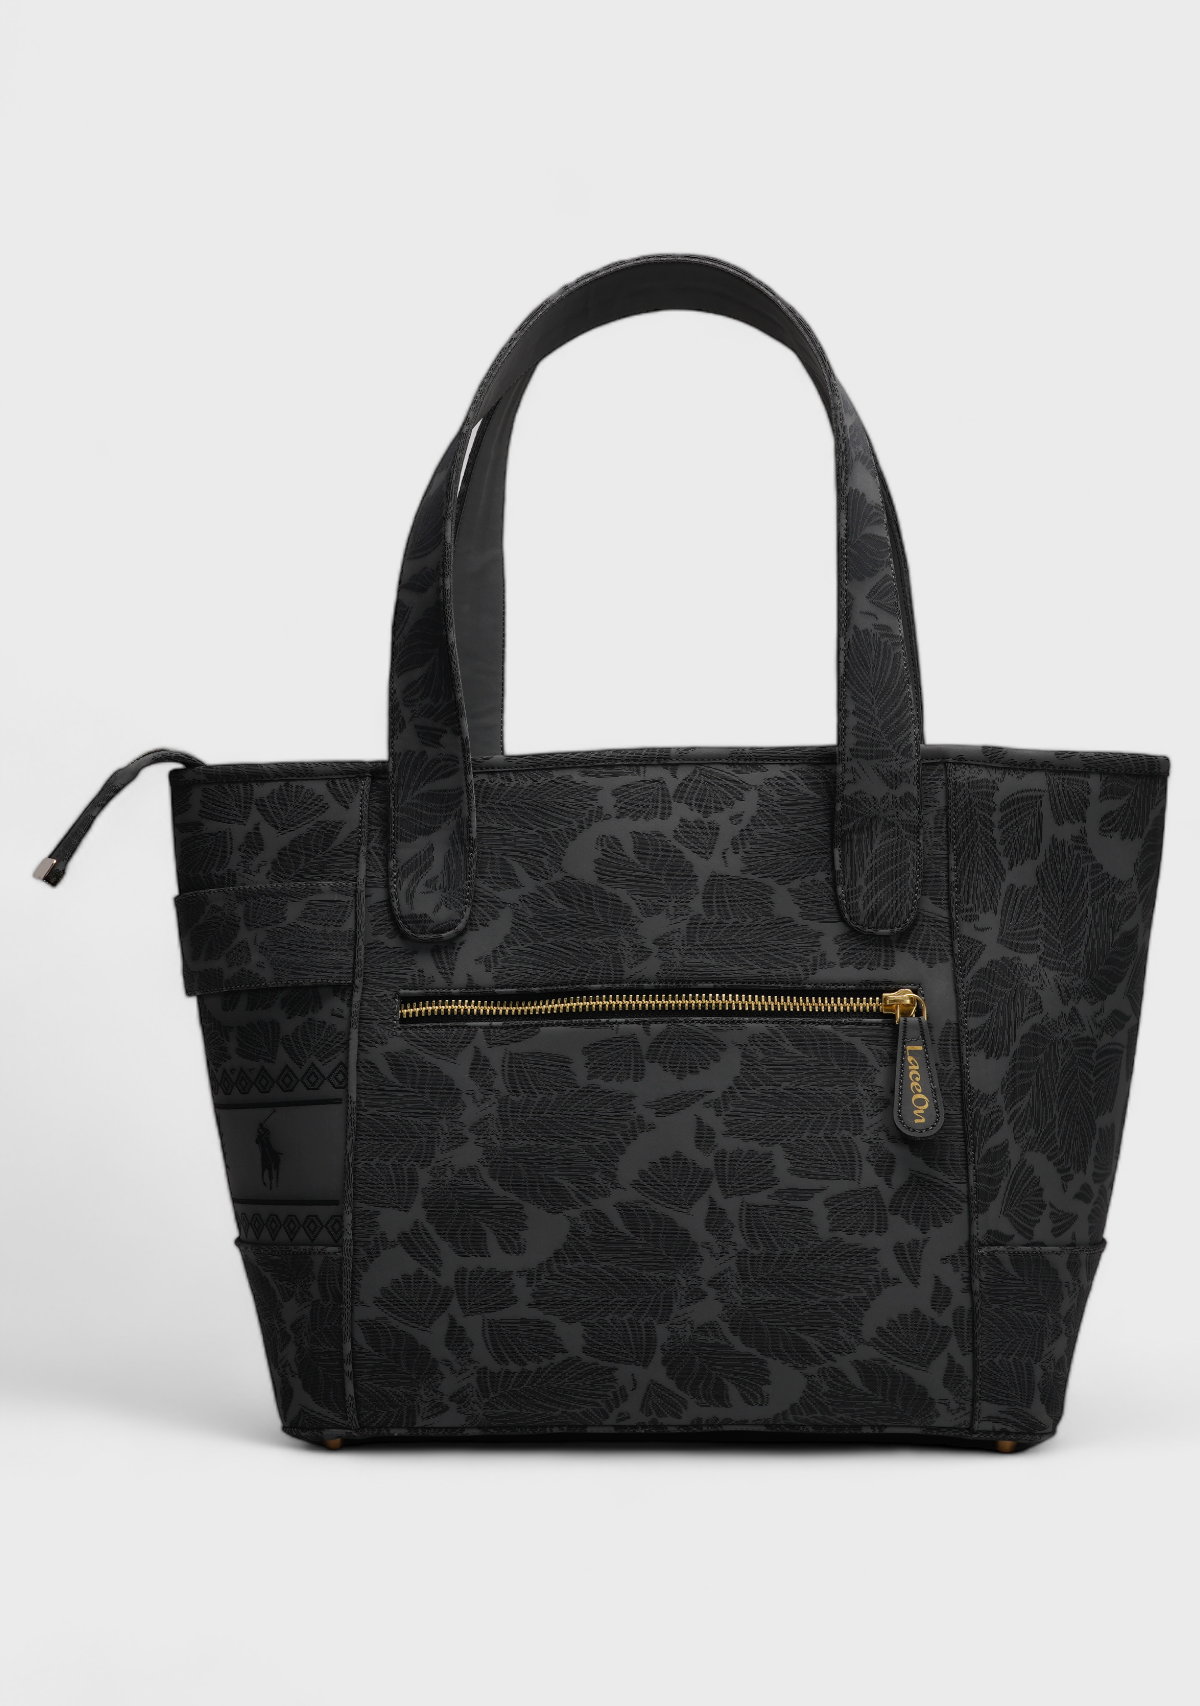 The Gallery Tote Handbag For Women